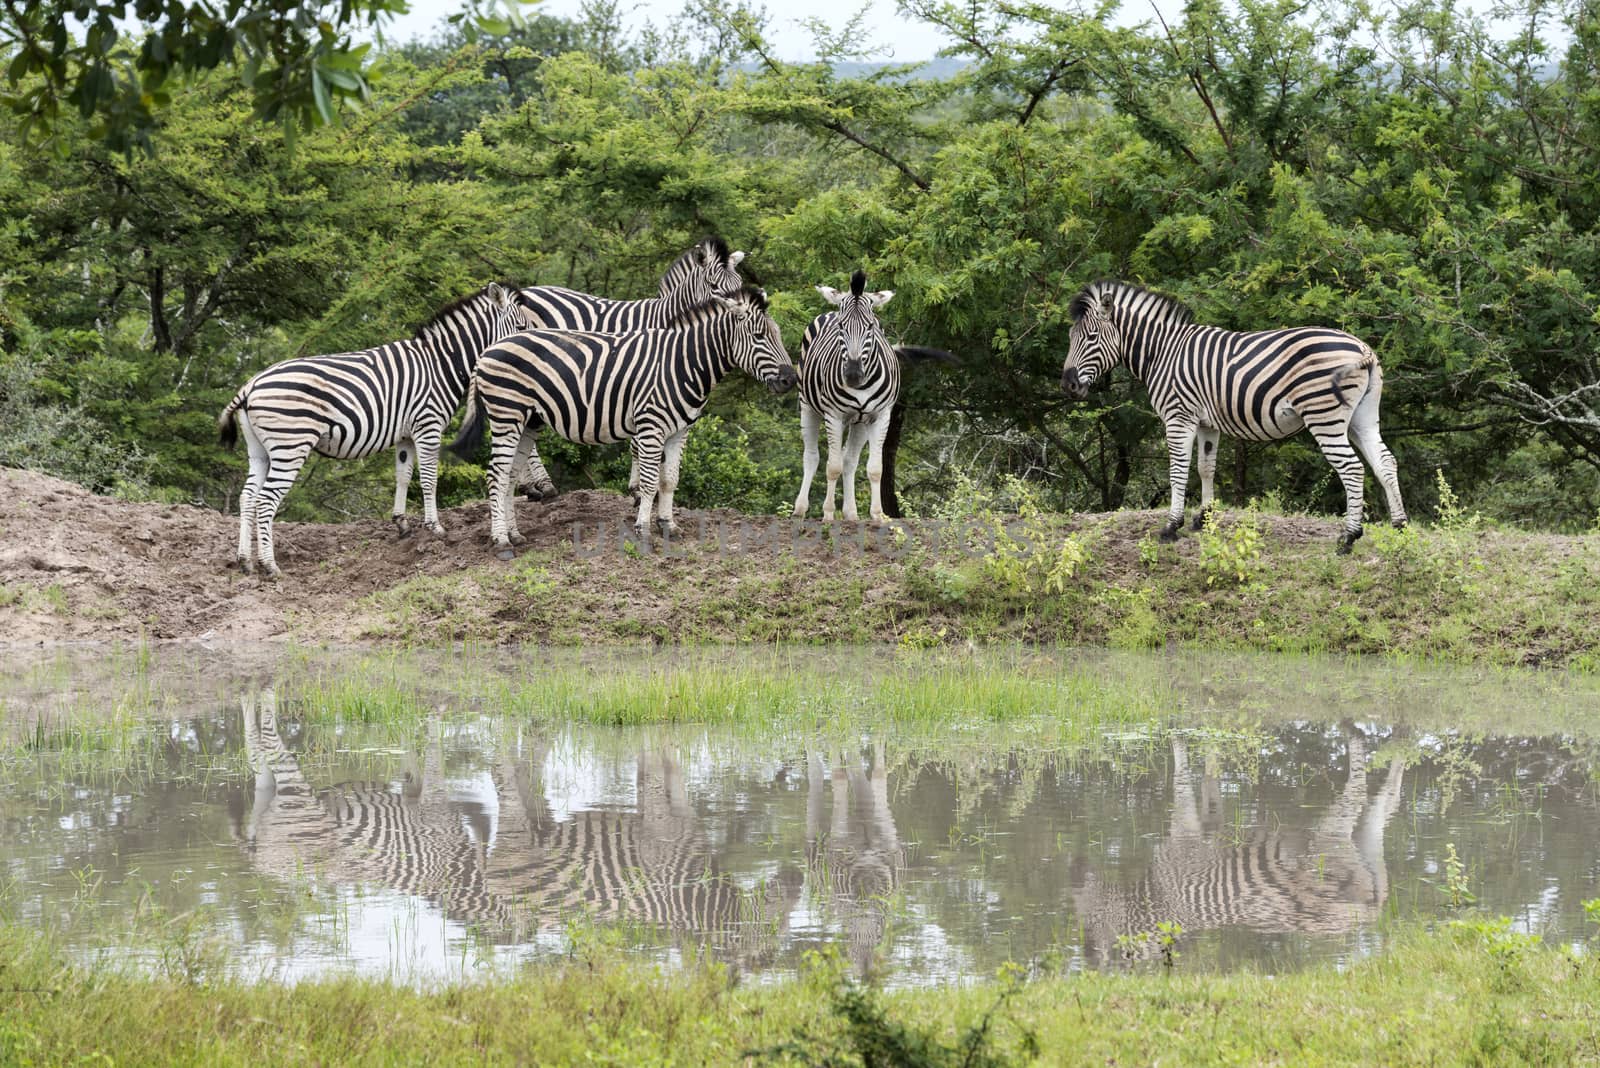 group of zebras  by compuinfoto